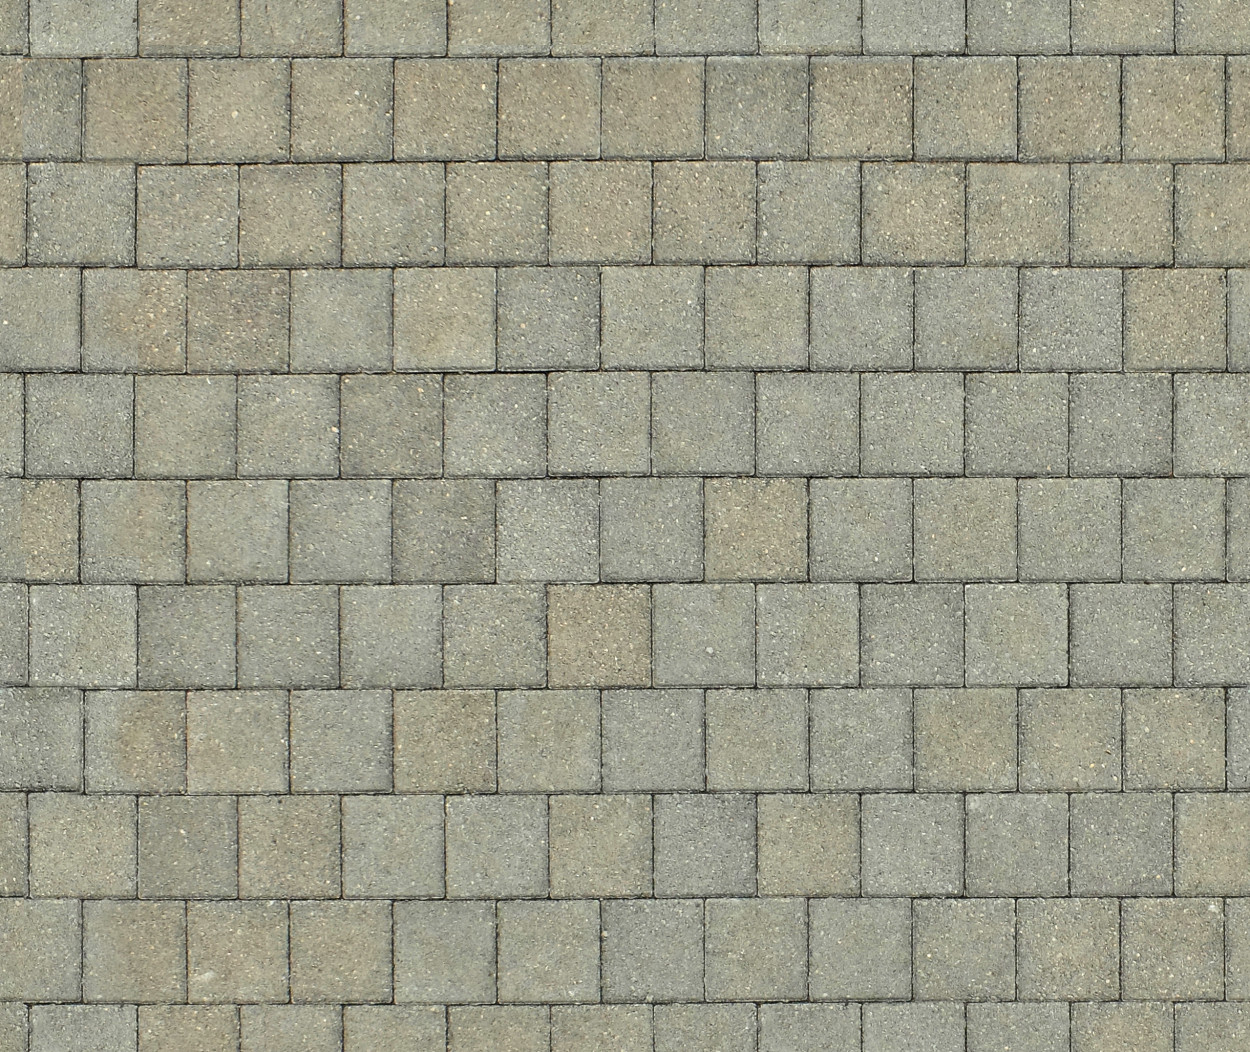 A seamless paving blocks texture for use in architectural drawings and 3D models